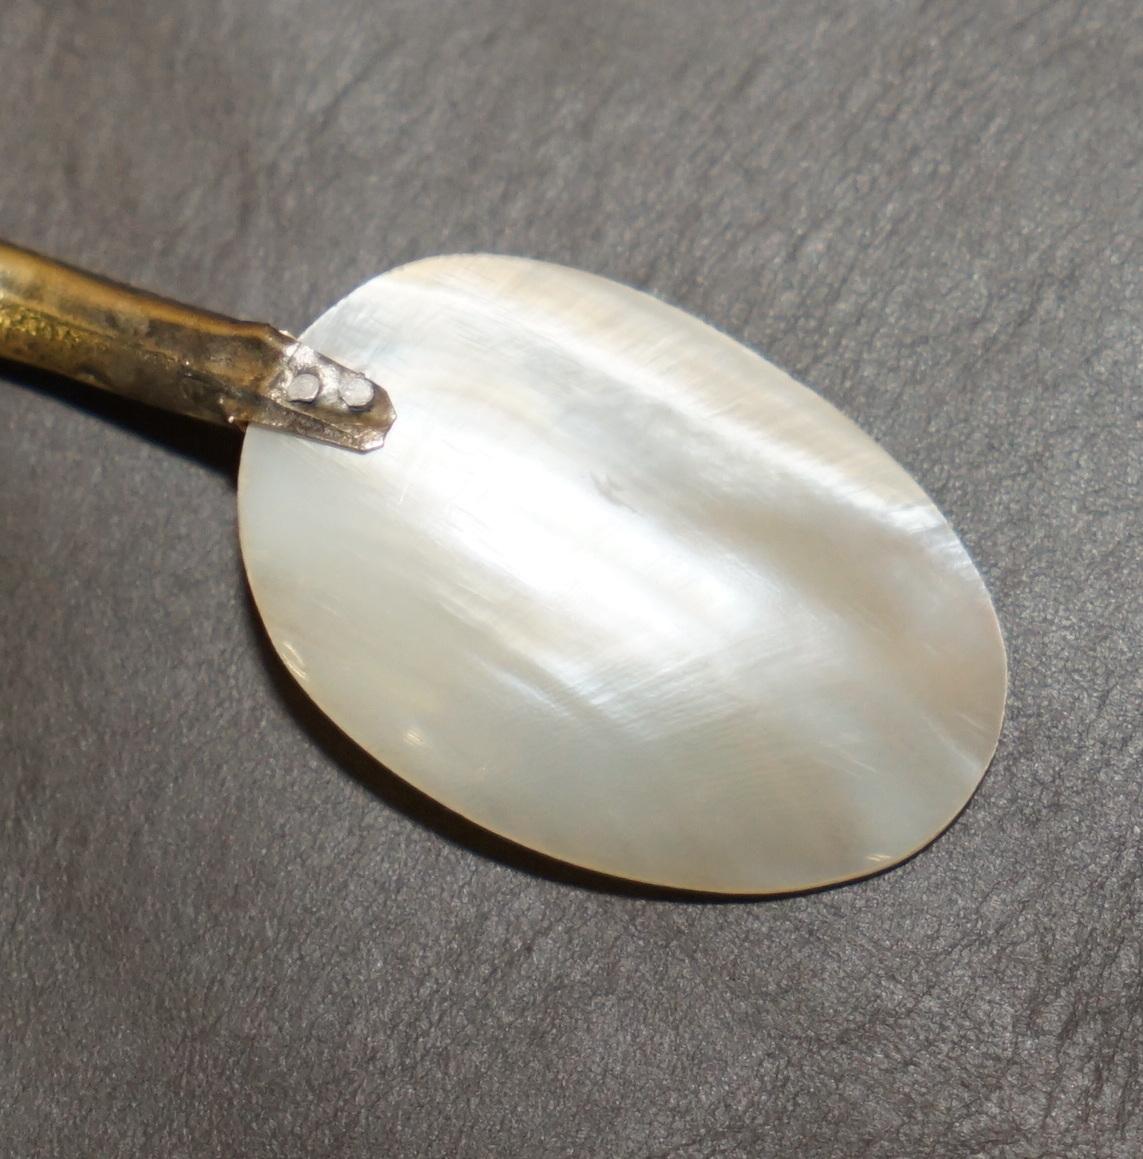 Argent sterling OUR MOUR ViCtorian MOTHER OF PEARL & STERLING SILVER TESTED SHELL TEA SPOONS en vente